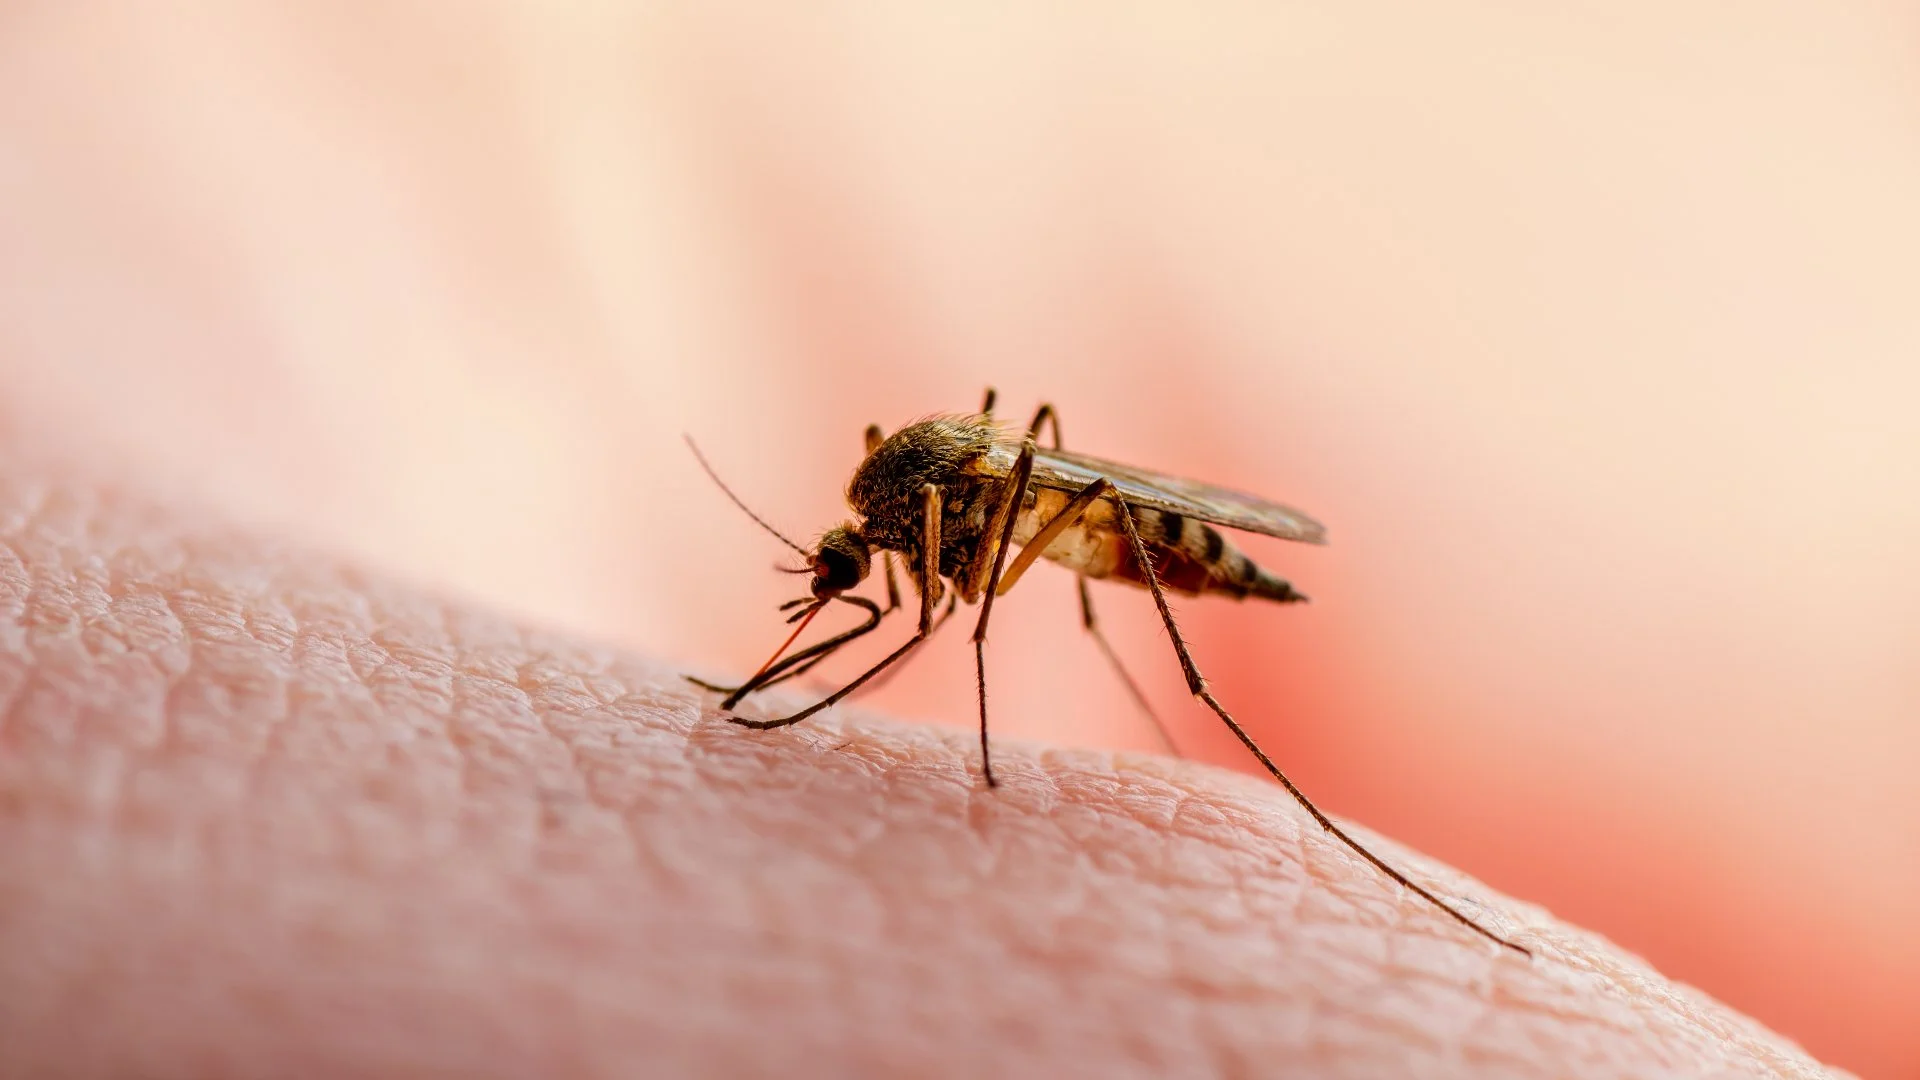 Steps You Can Take To Make Your Property Less Attractive to Mosquitoes